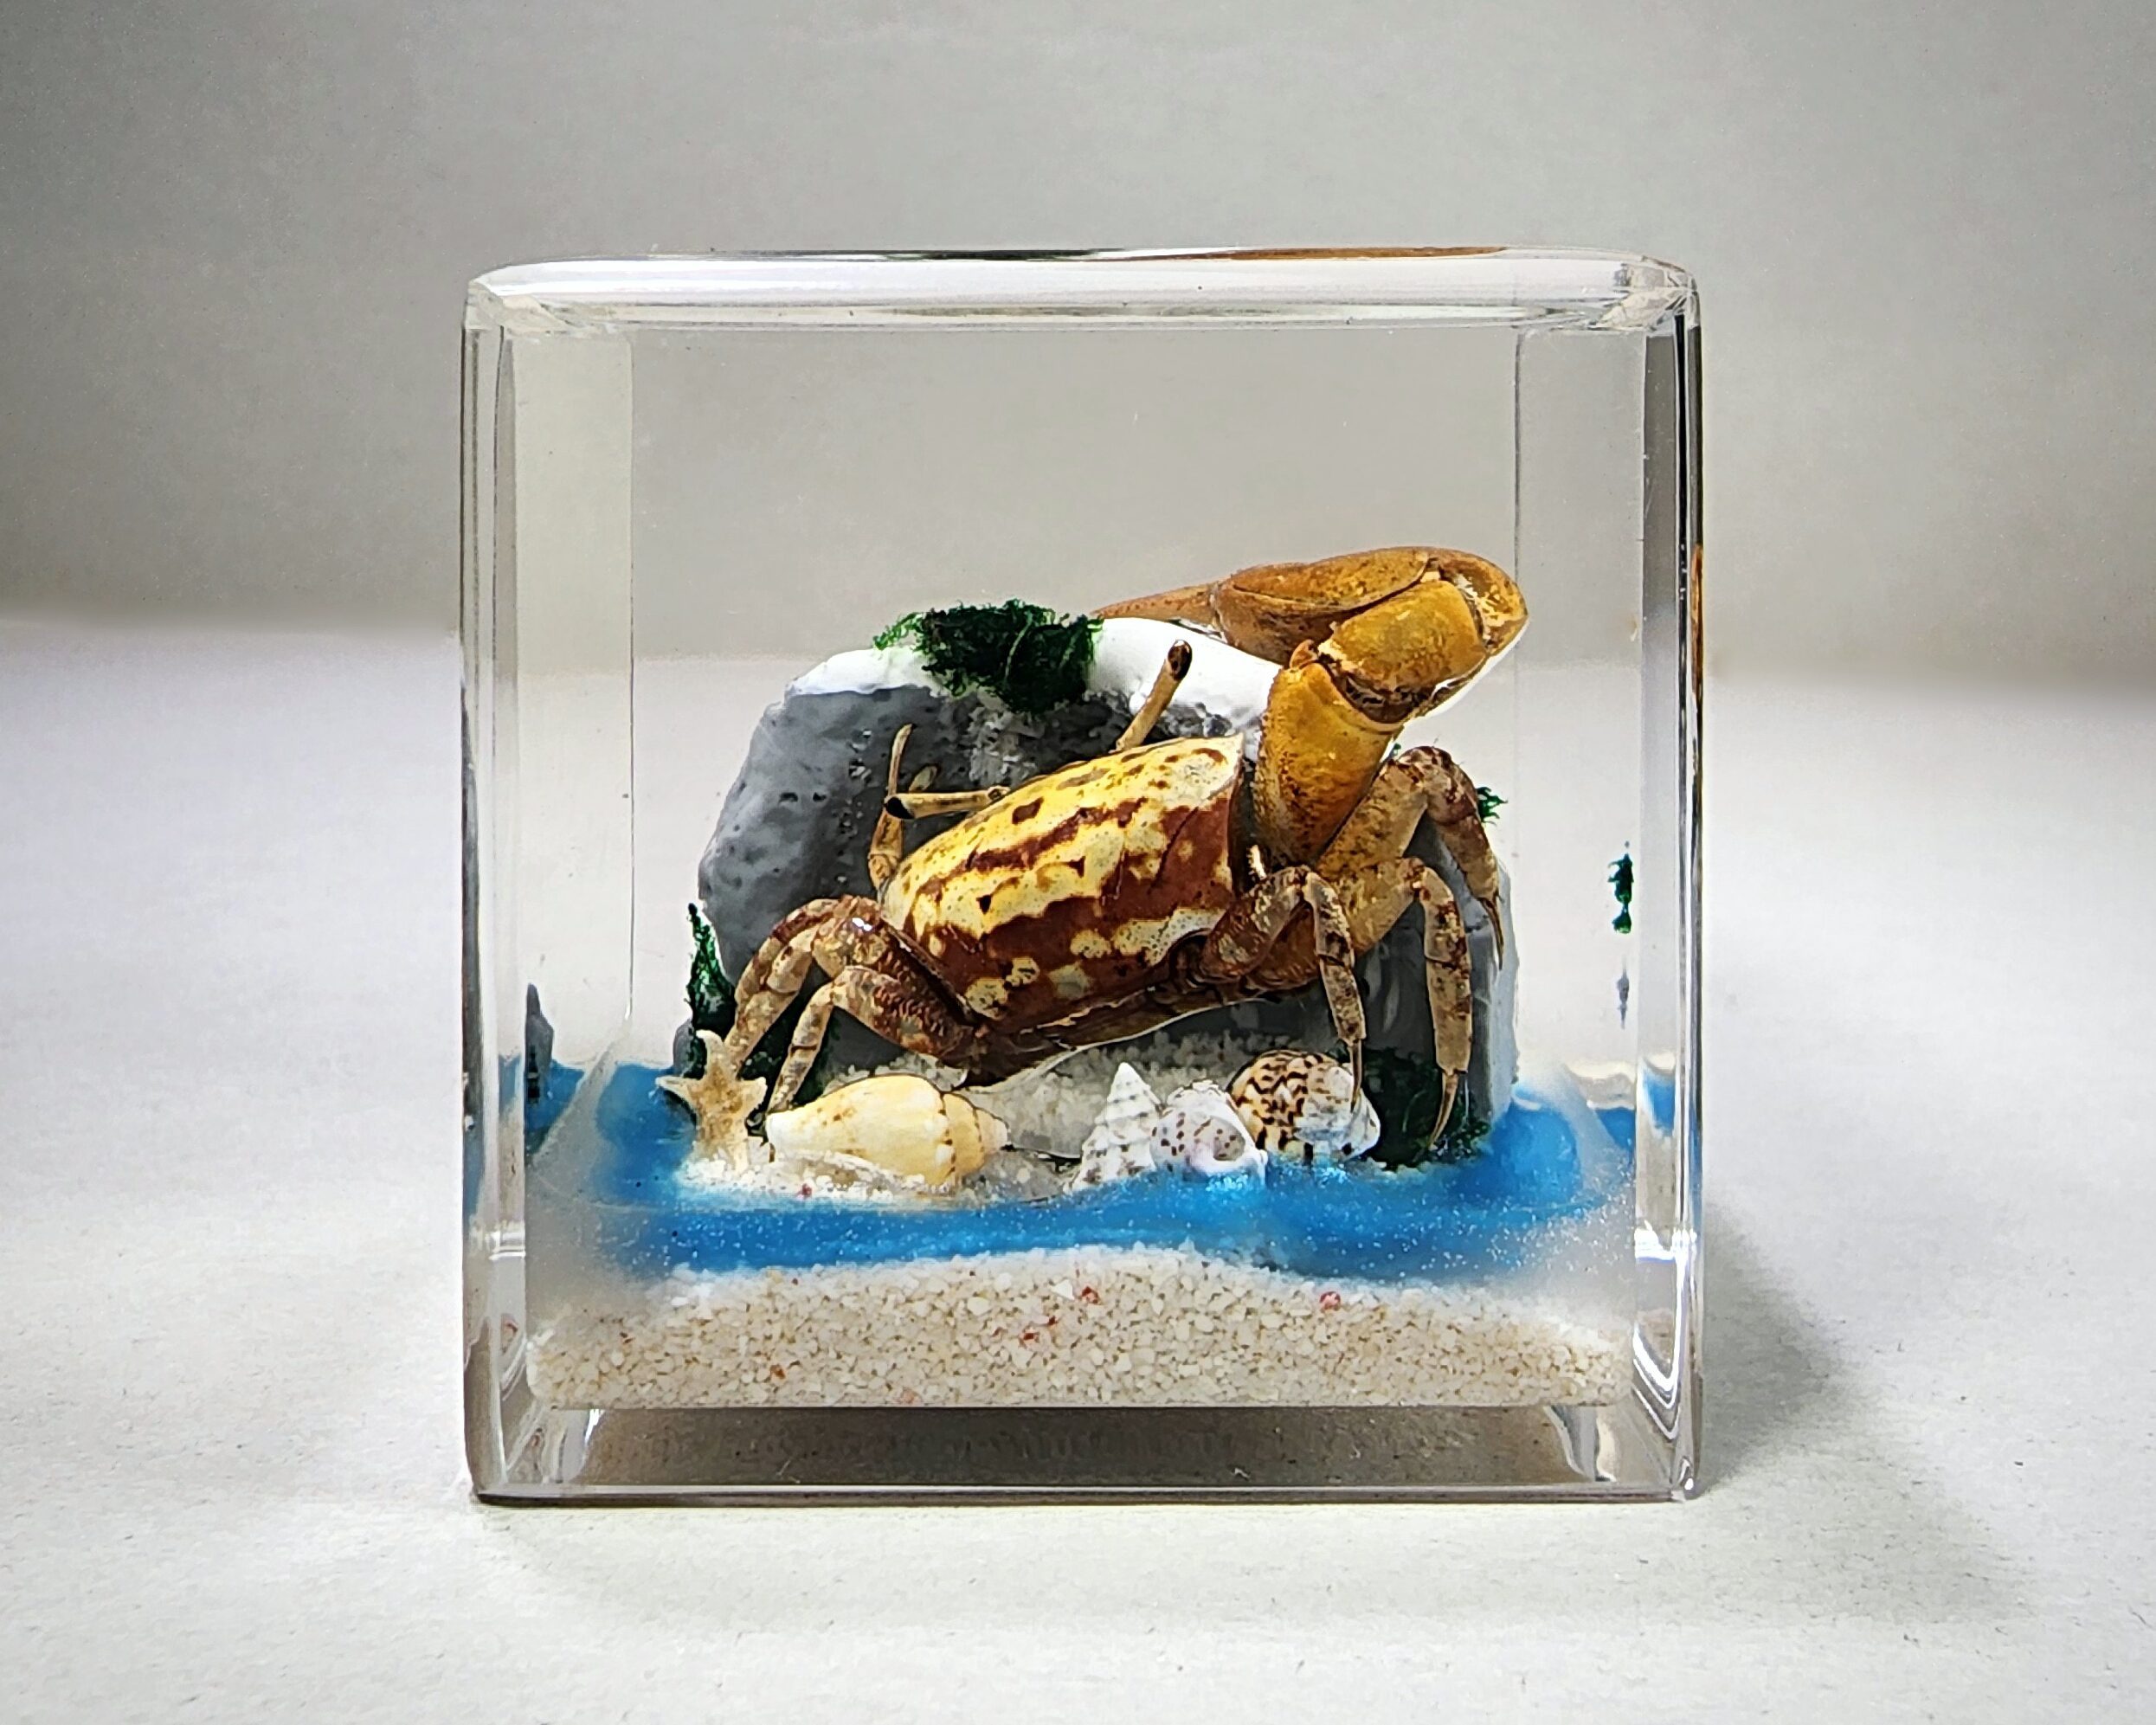 Fiddler Crab in Resin, Uca crassipes - Insects In Resin